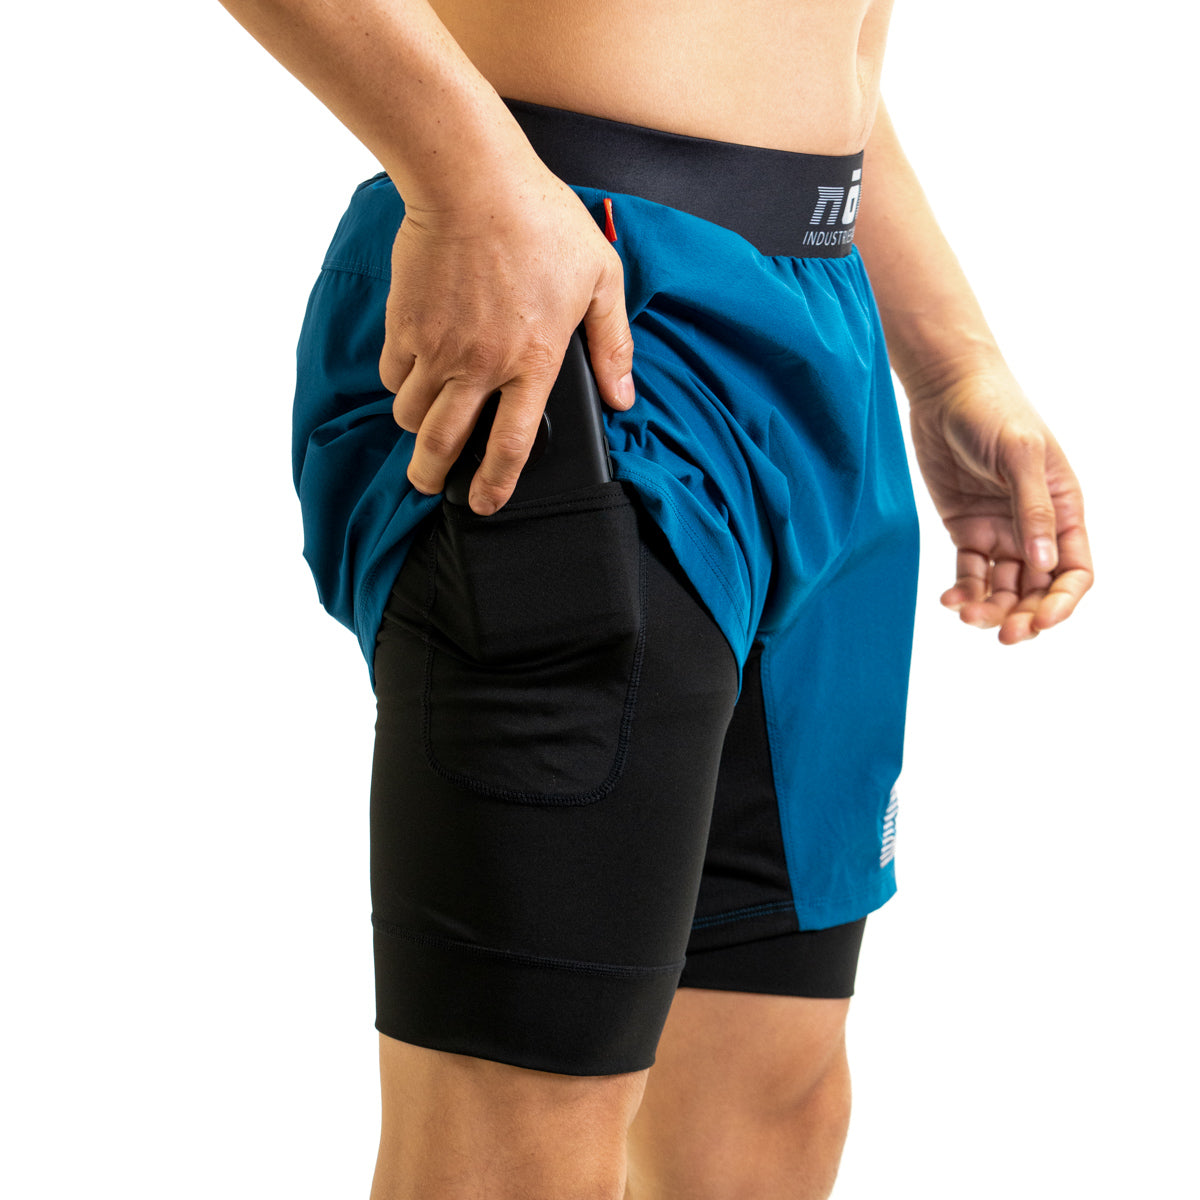 Ghost 7" Premium Lined Grappling Shorts - Ultramarine Blue Pocket View